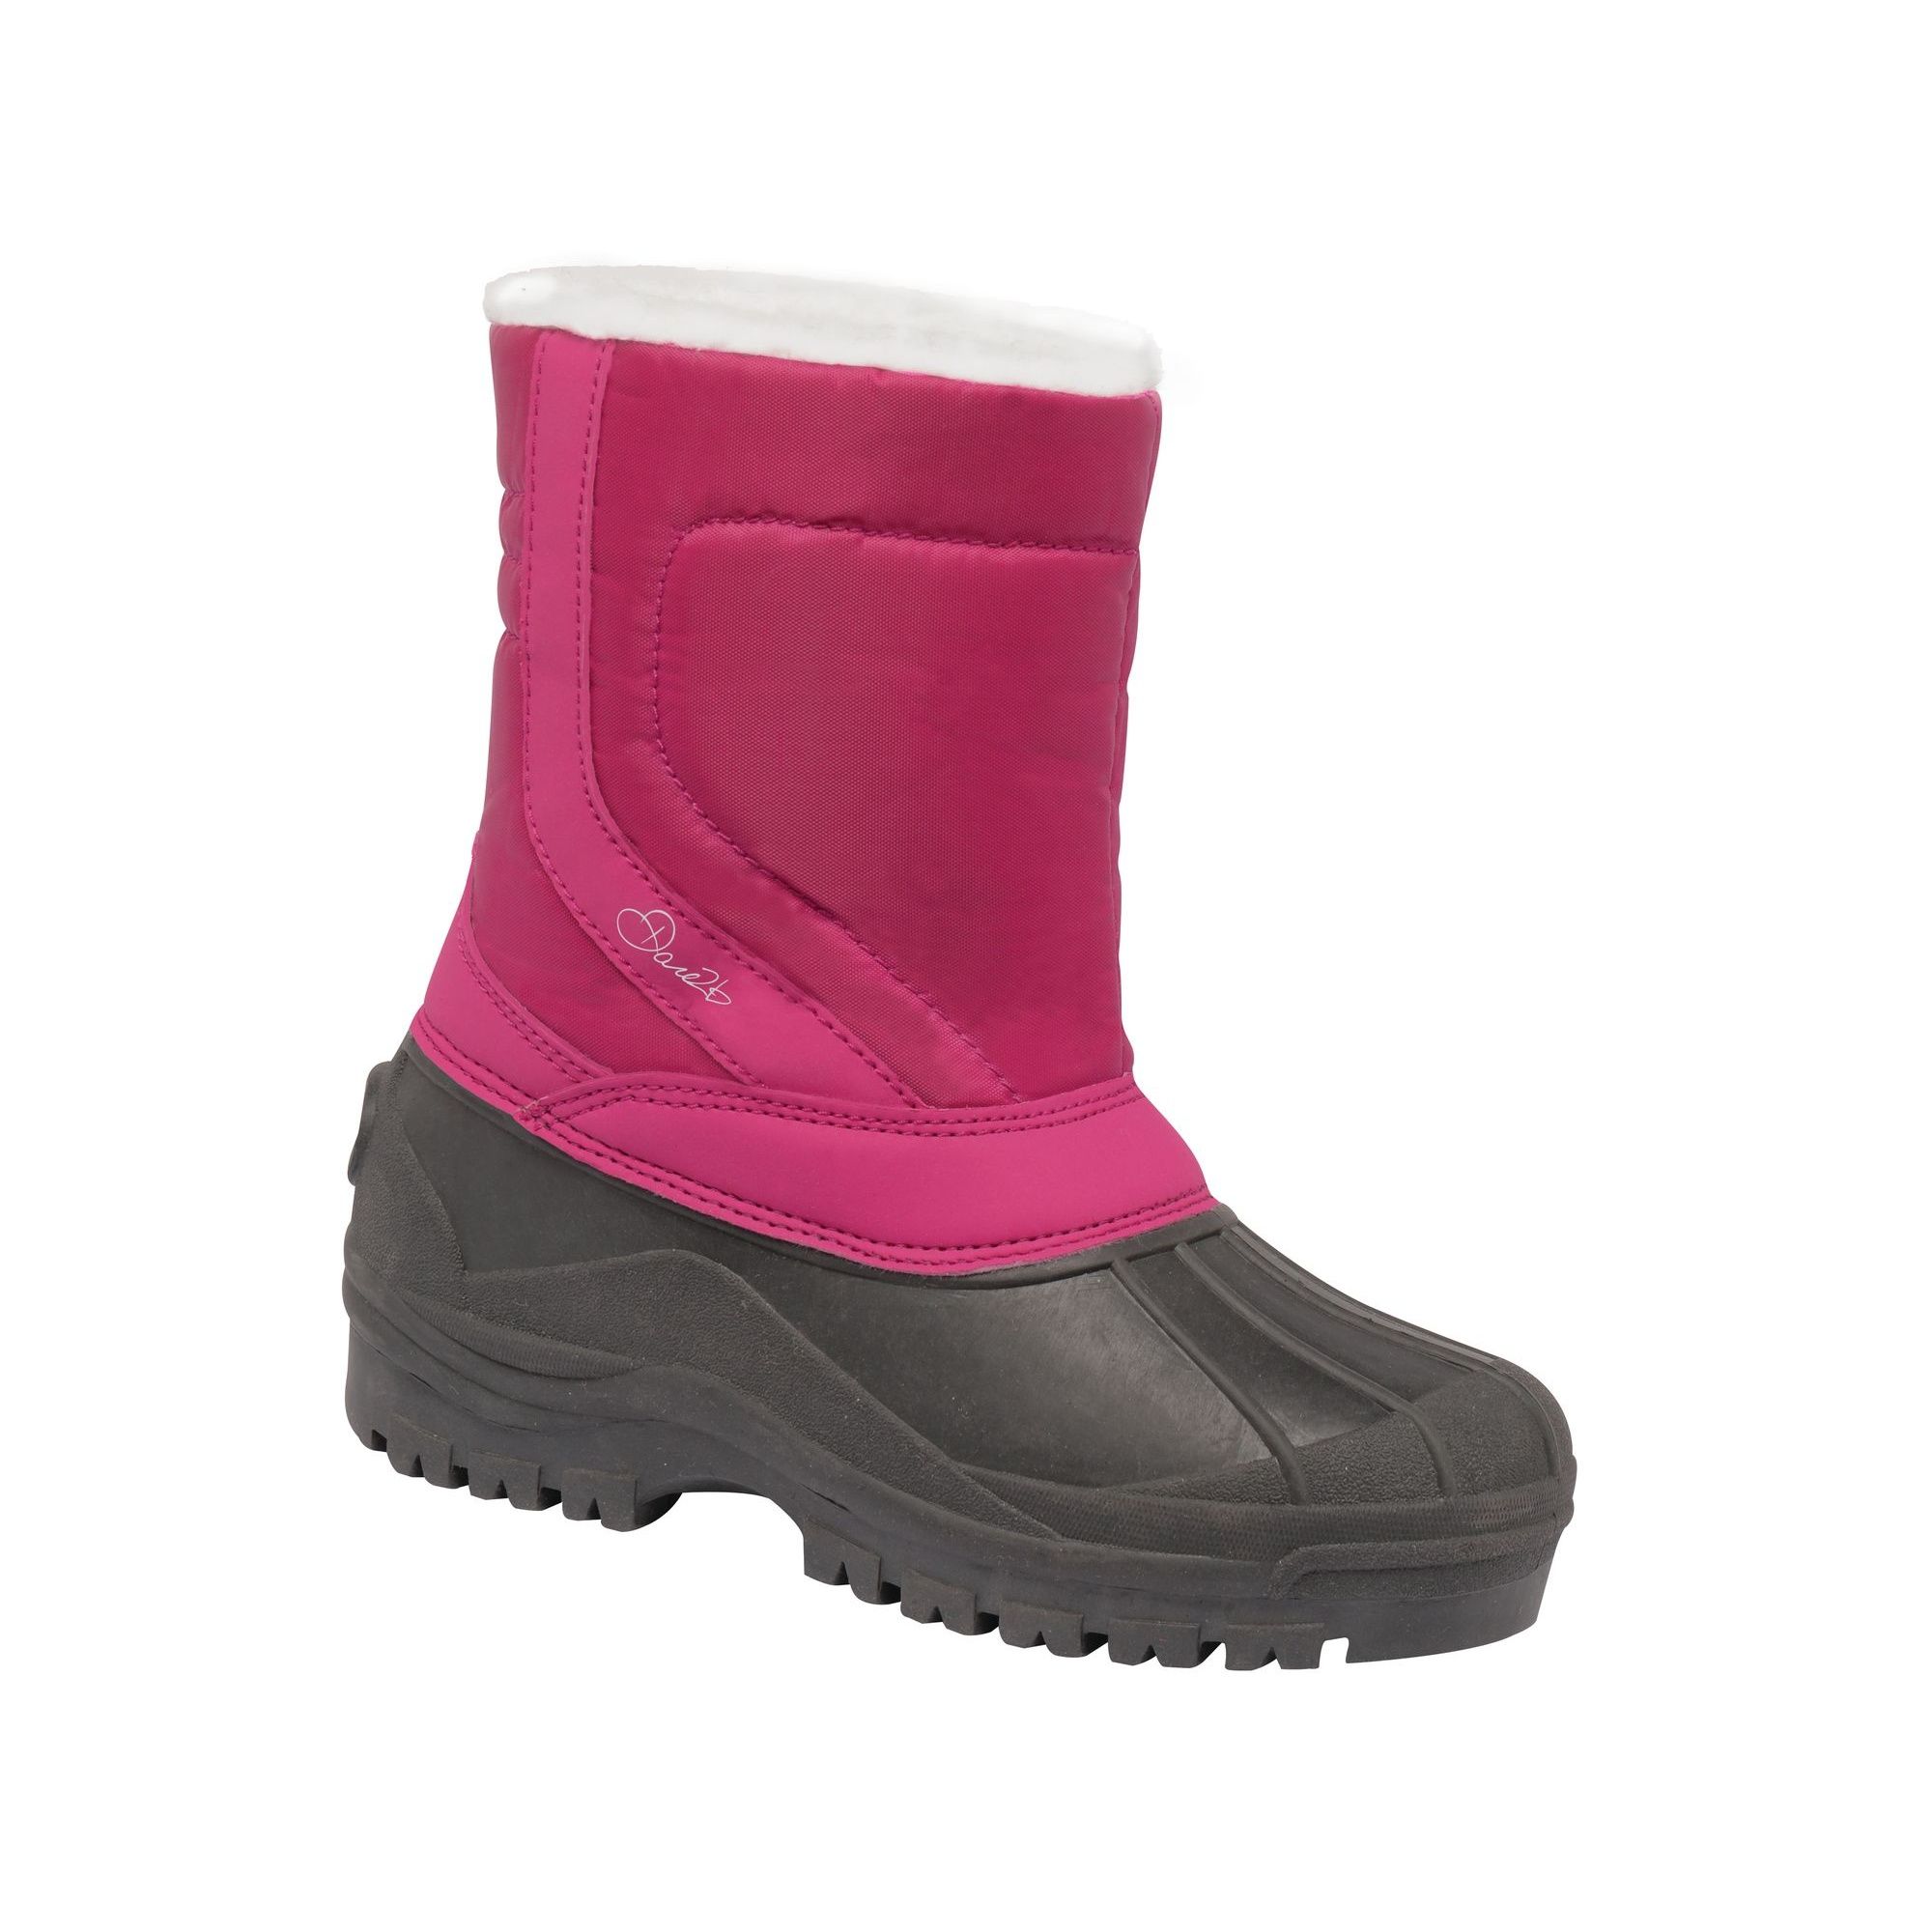 Childrens snow boots. EndoThermic Performance (ETP). Waterproof and warm lined. Ared snowproof fabric - durable water repellent finish. Woven textile and PU upper. Short pile velvet fleece collar trim. Insulating Sherpa fleece lining and footbed. Die cut EVA footbed for underfoot comfort and support. Protective injection moulded TPR outsole shell.